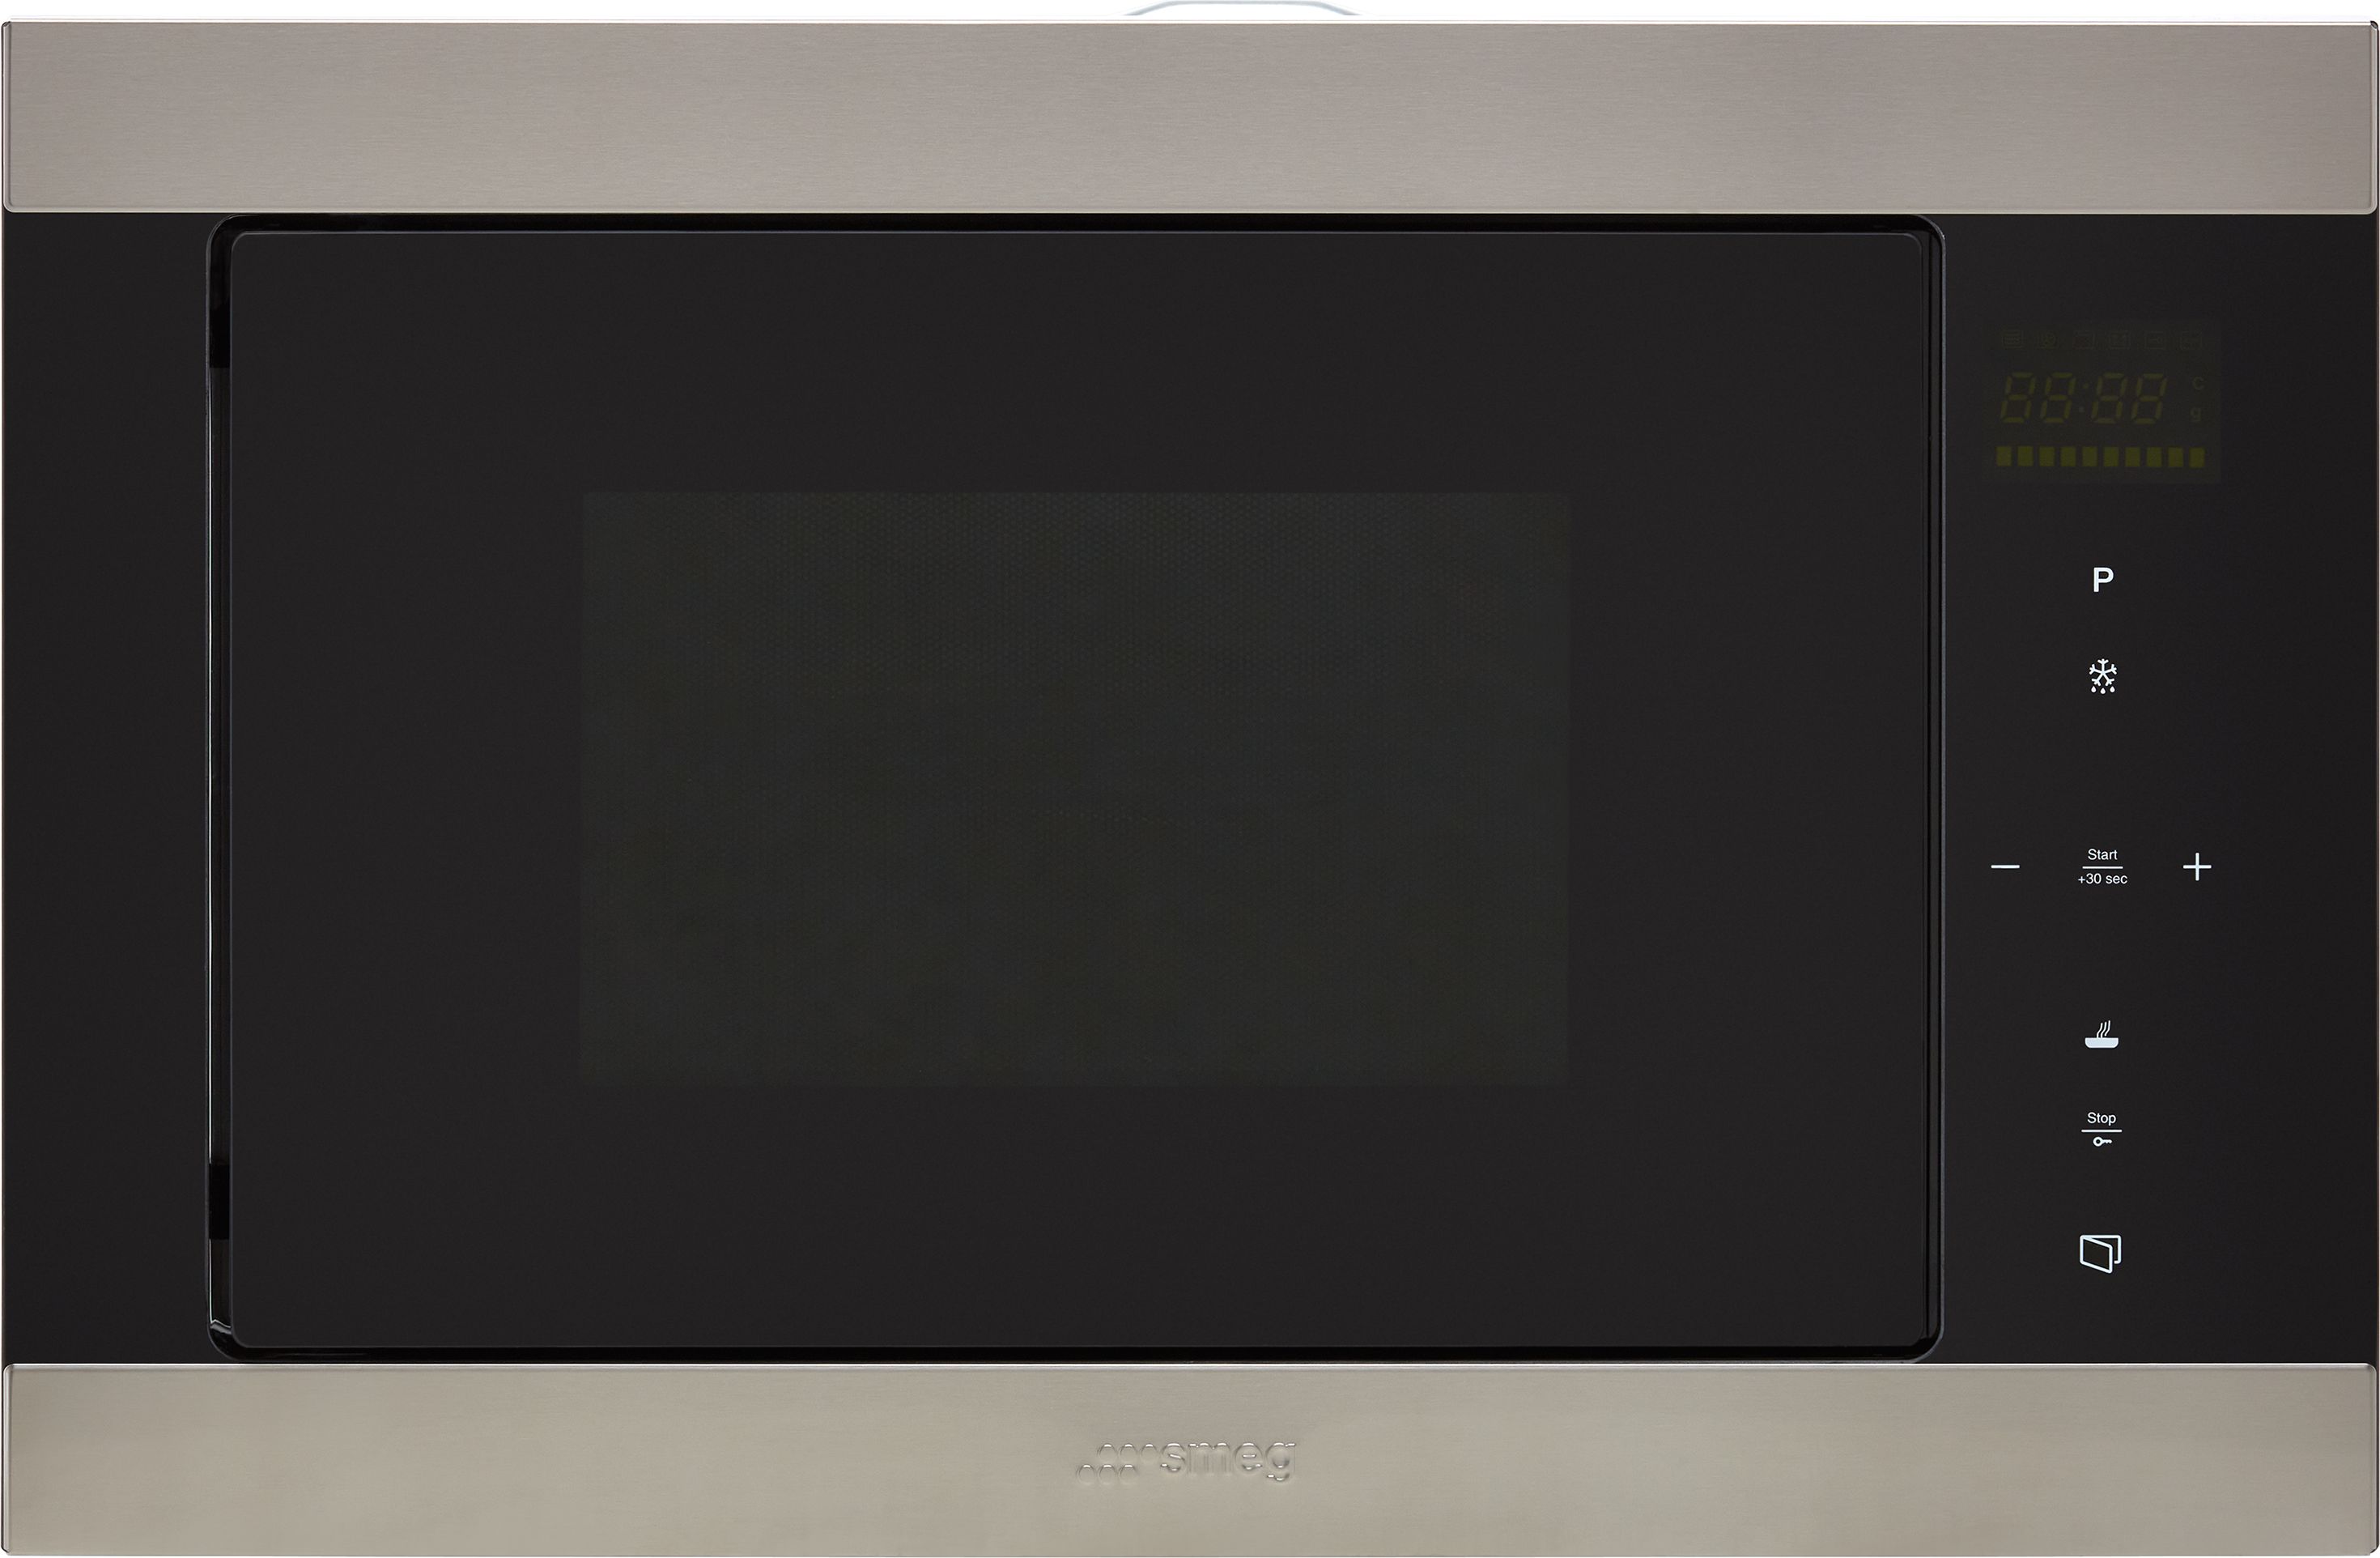 Smeg Classic FMI325X 39cm tall, 60cm wide, Built In Compact Microwave - Stainless Steel, Stainless Steel